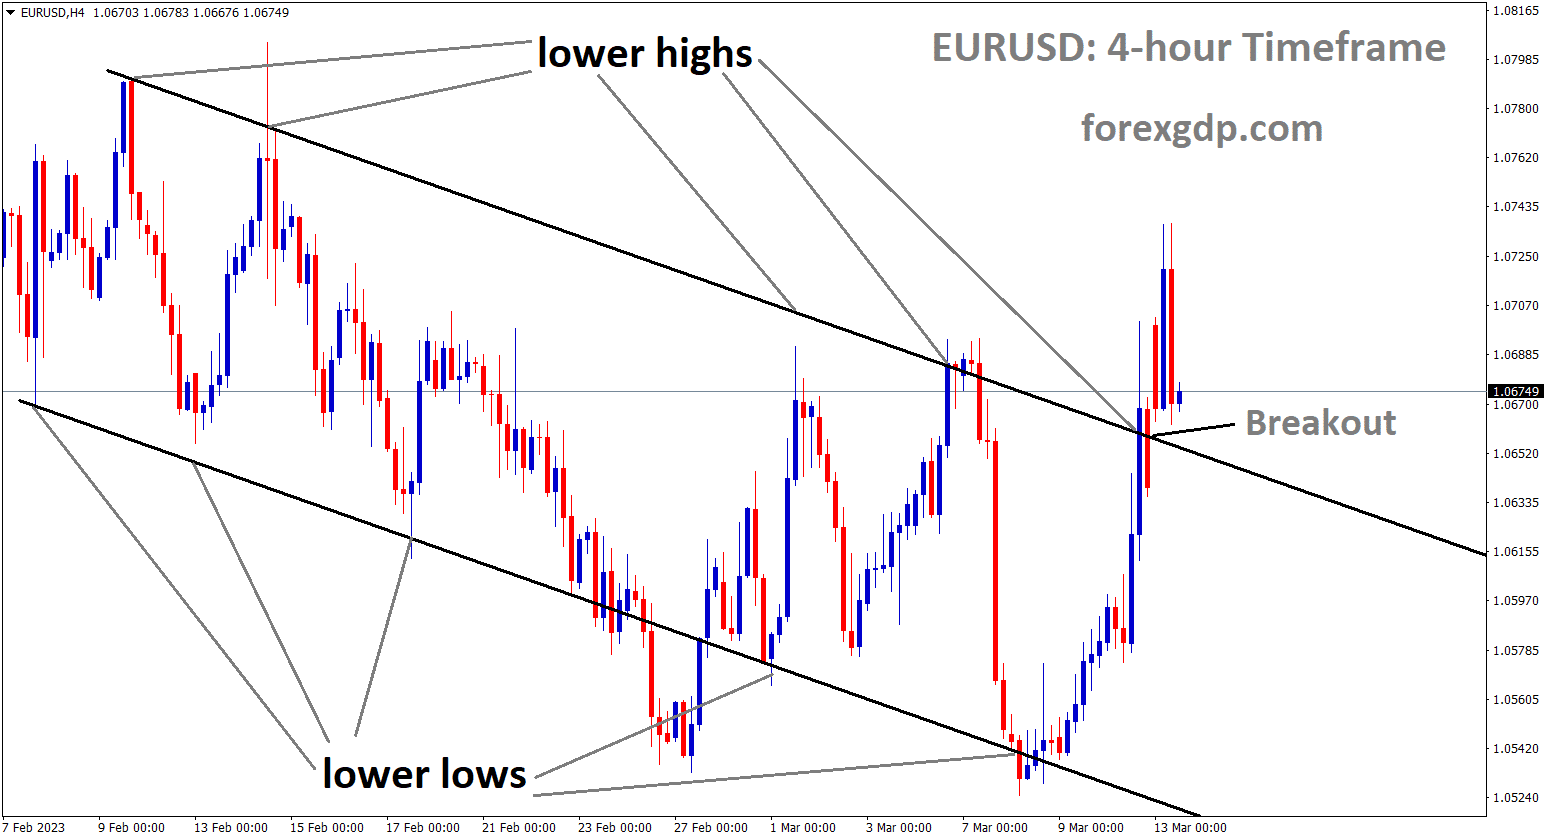 EURUSD is moving in Descending channel and the market has broken the lower high area of the channel.